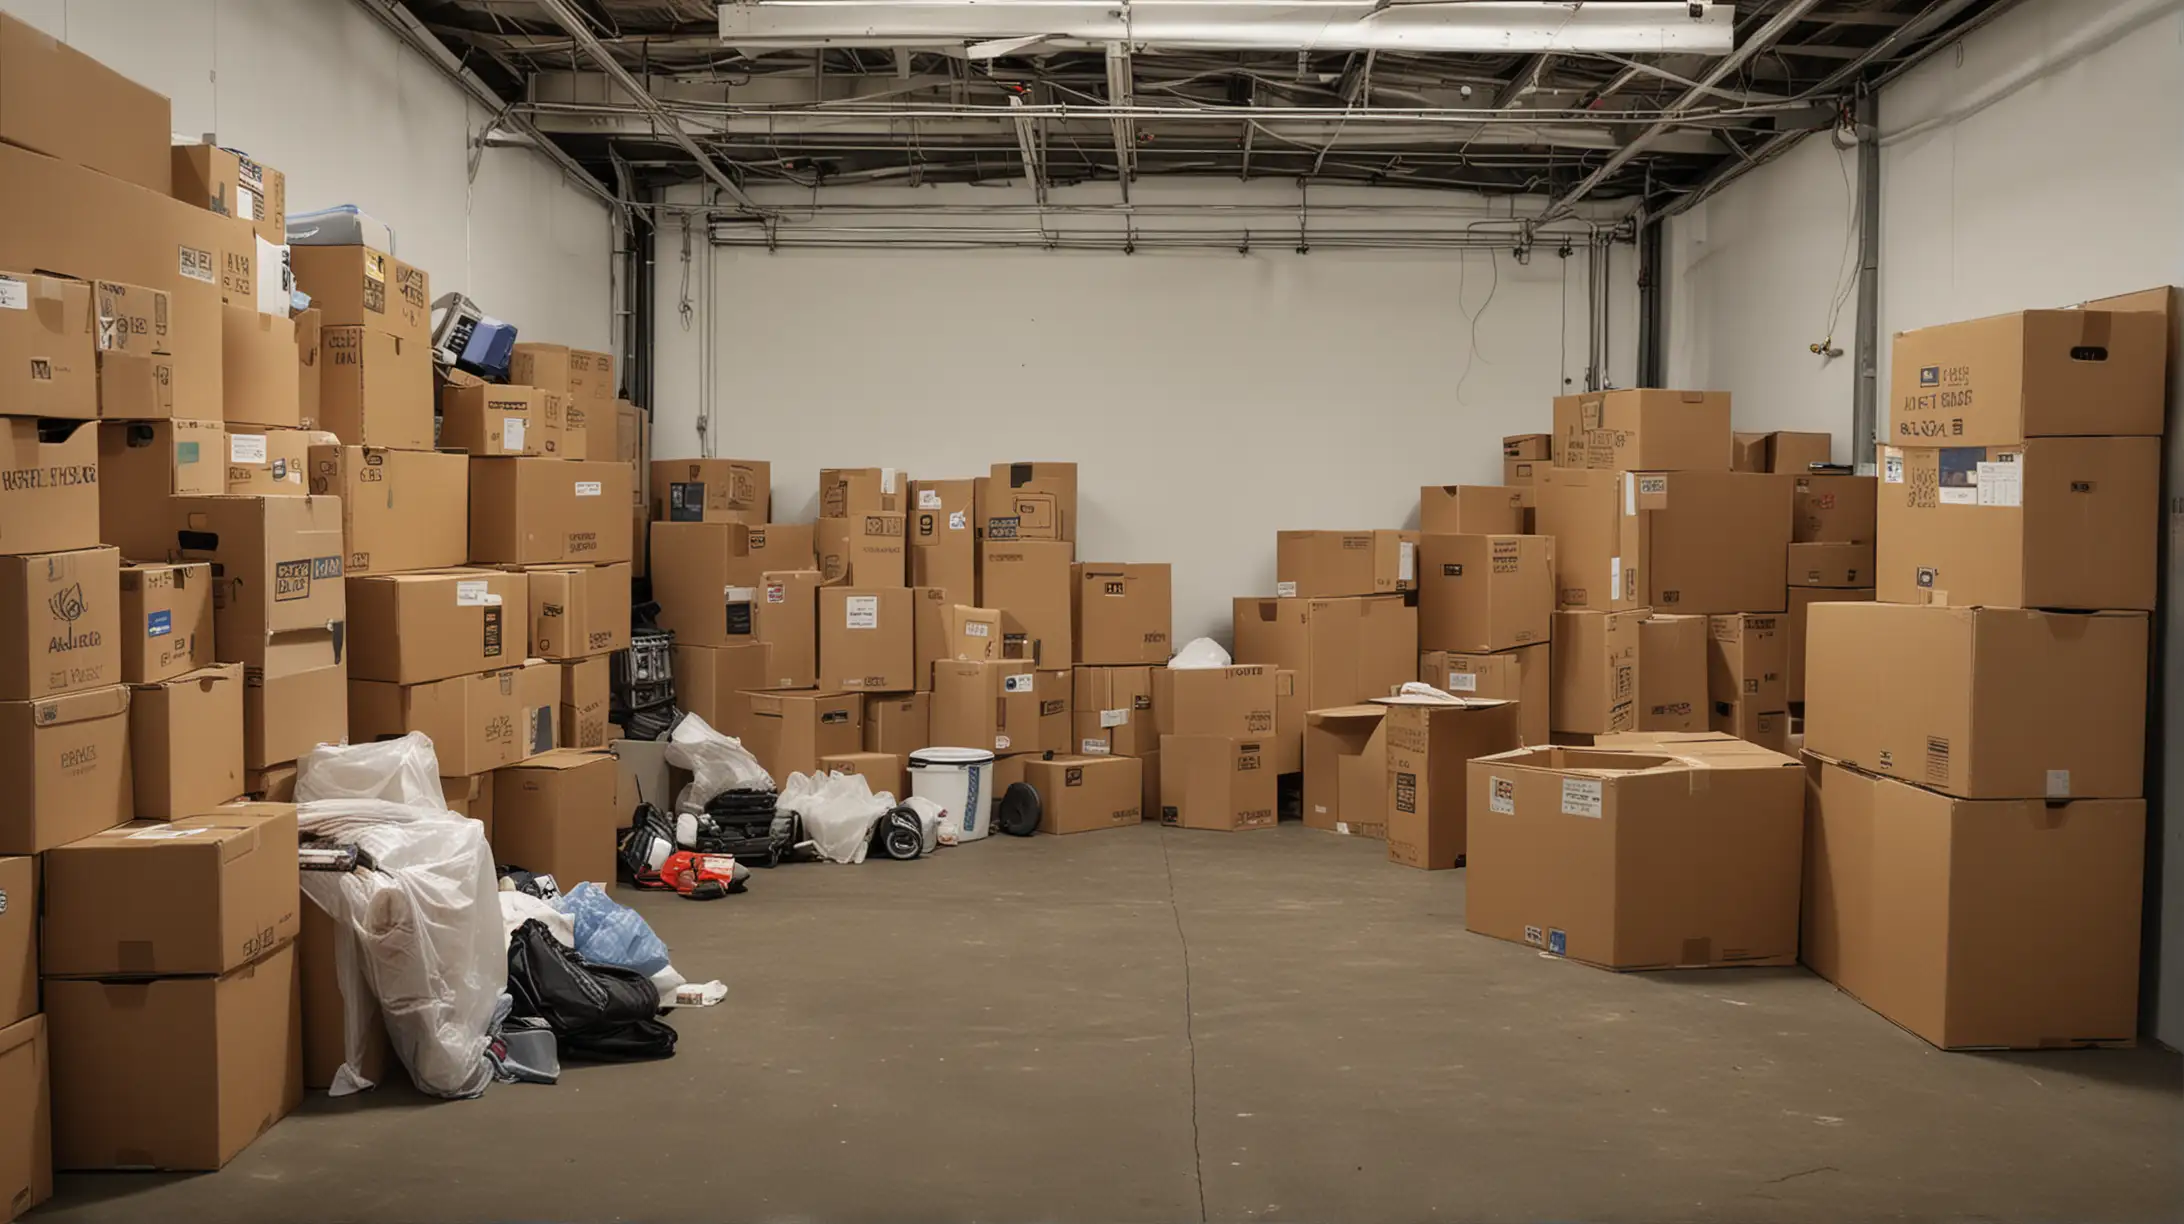 Create a high-quality photograph of a storage unit in the process of being cleaned out by Route Runners Junk Removal. The image should capture a wide variety of items including furniture, electronics, boxes, and household goods, neatly arranged into different sections for disposal, donation, and recycling. The scene should be set inside a typical storage facility, emphasizing the organized chaos of the sorting process. Use a DSLR camera with a 35mm lens to capture the full scope of the unit and the items in sharp detail, ensuring natural lighting illuminates the diverse textures and conditions of the items.